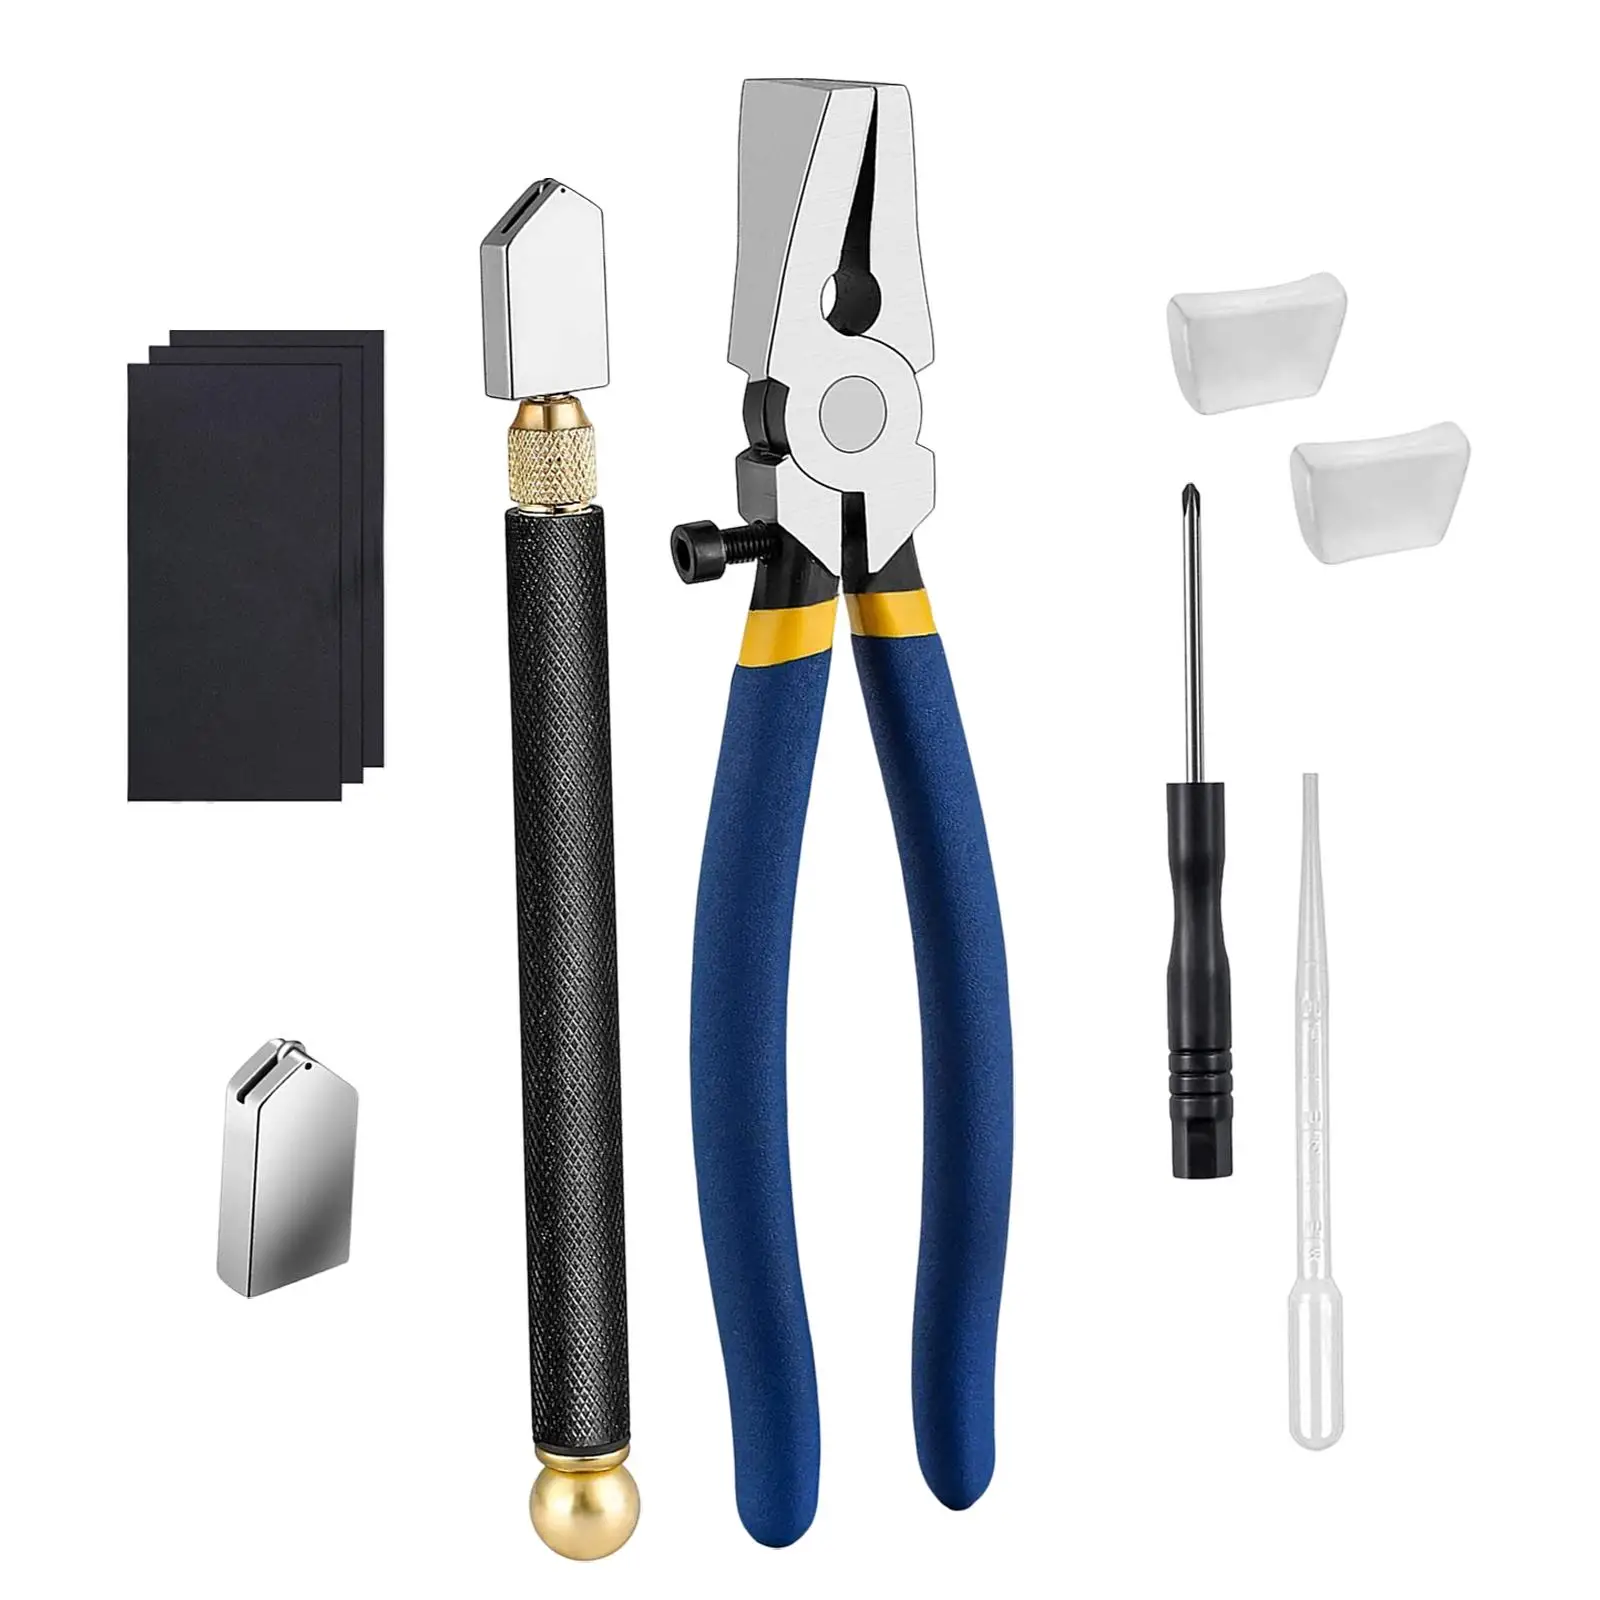 10x Glass Cutting Tool Kit and Oil Dropper with Extra Replacement Head Breaking Plier for Stained Glass Mosaics